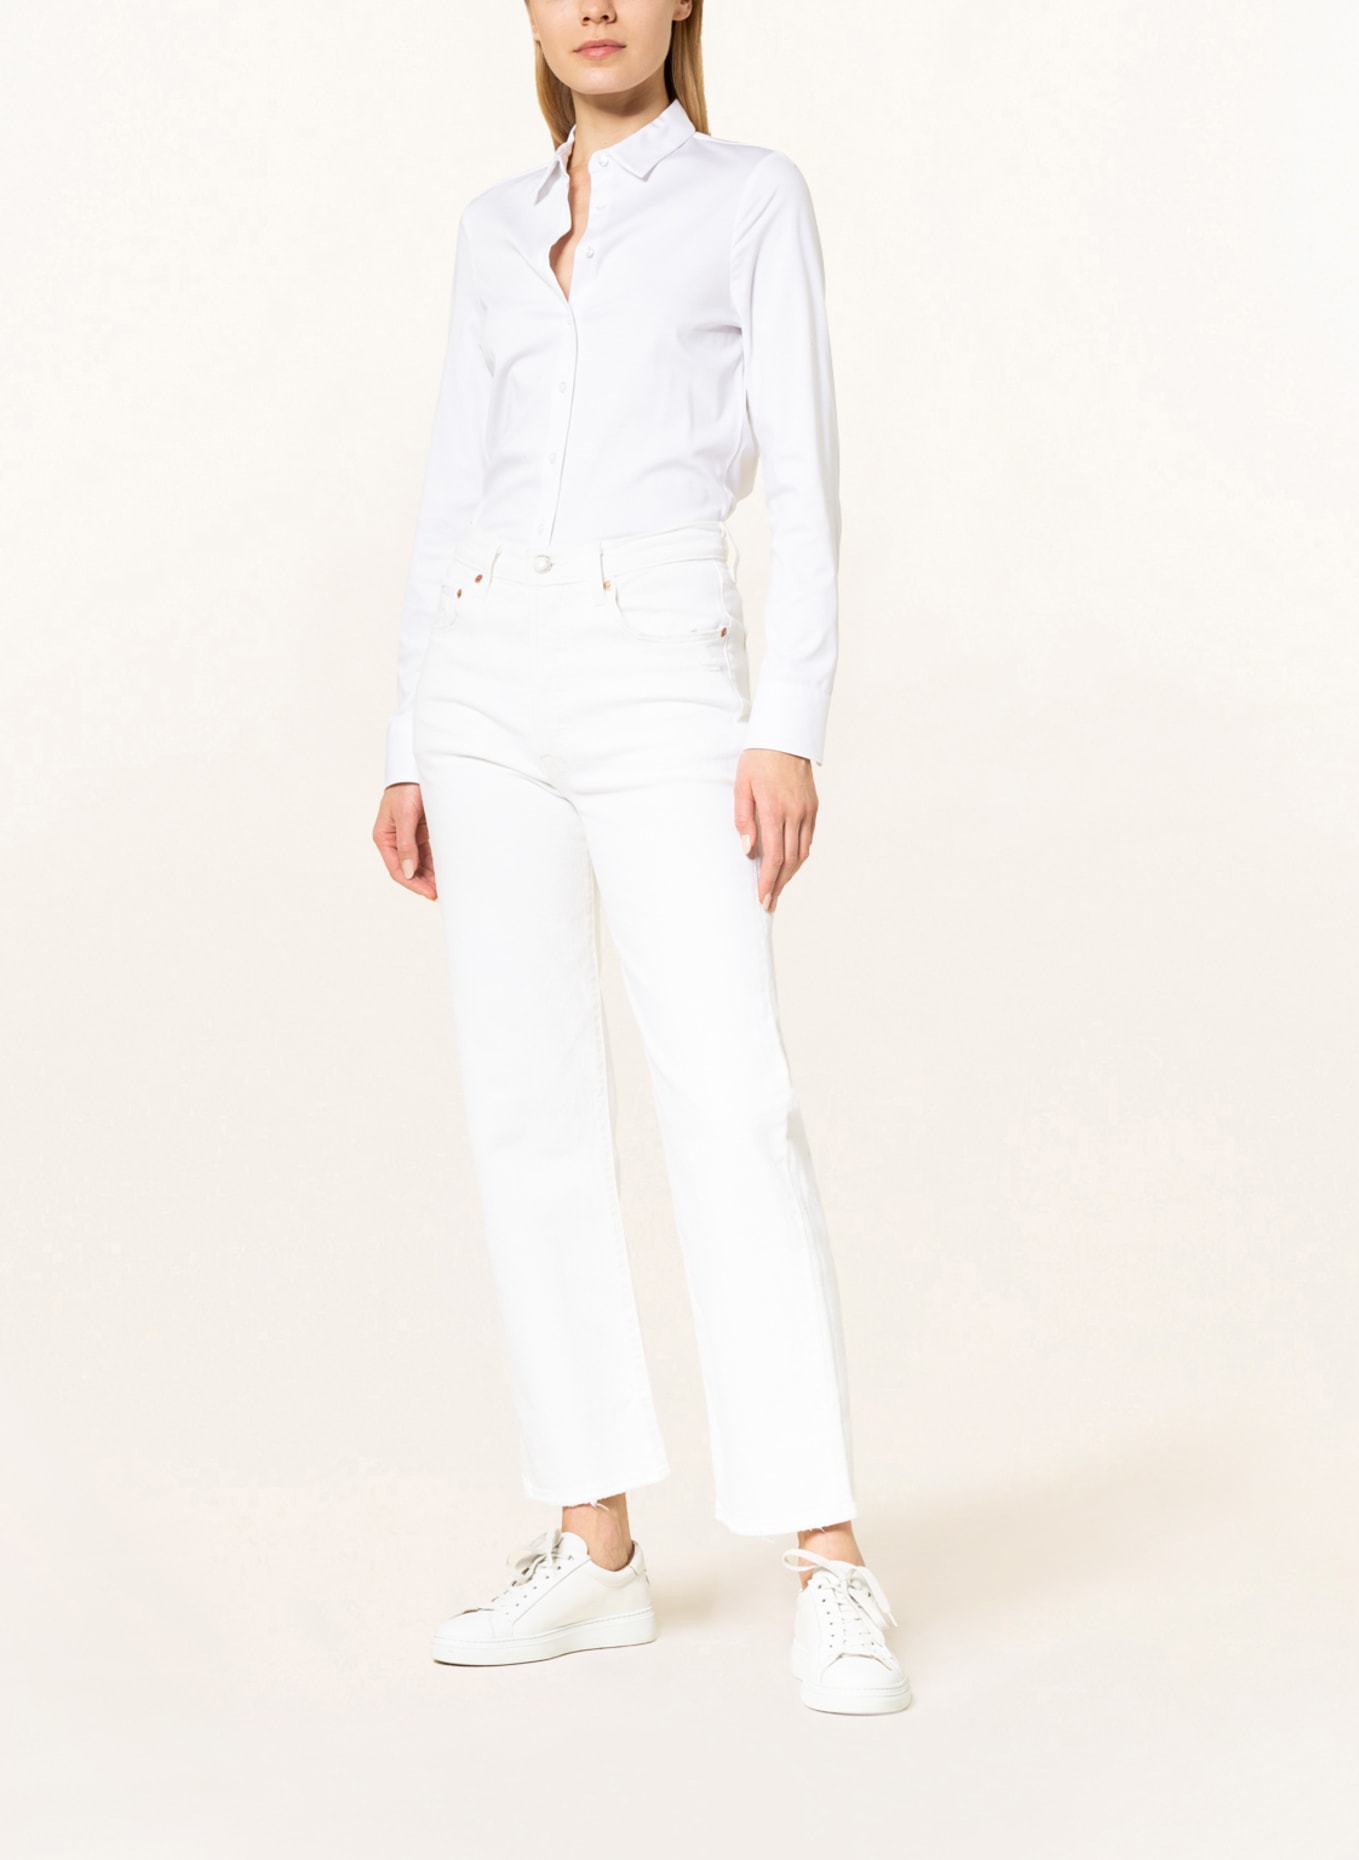 ETERNA Shirt blouse made of jersey, Color: WHITE (Image 2)